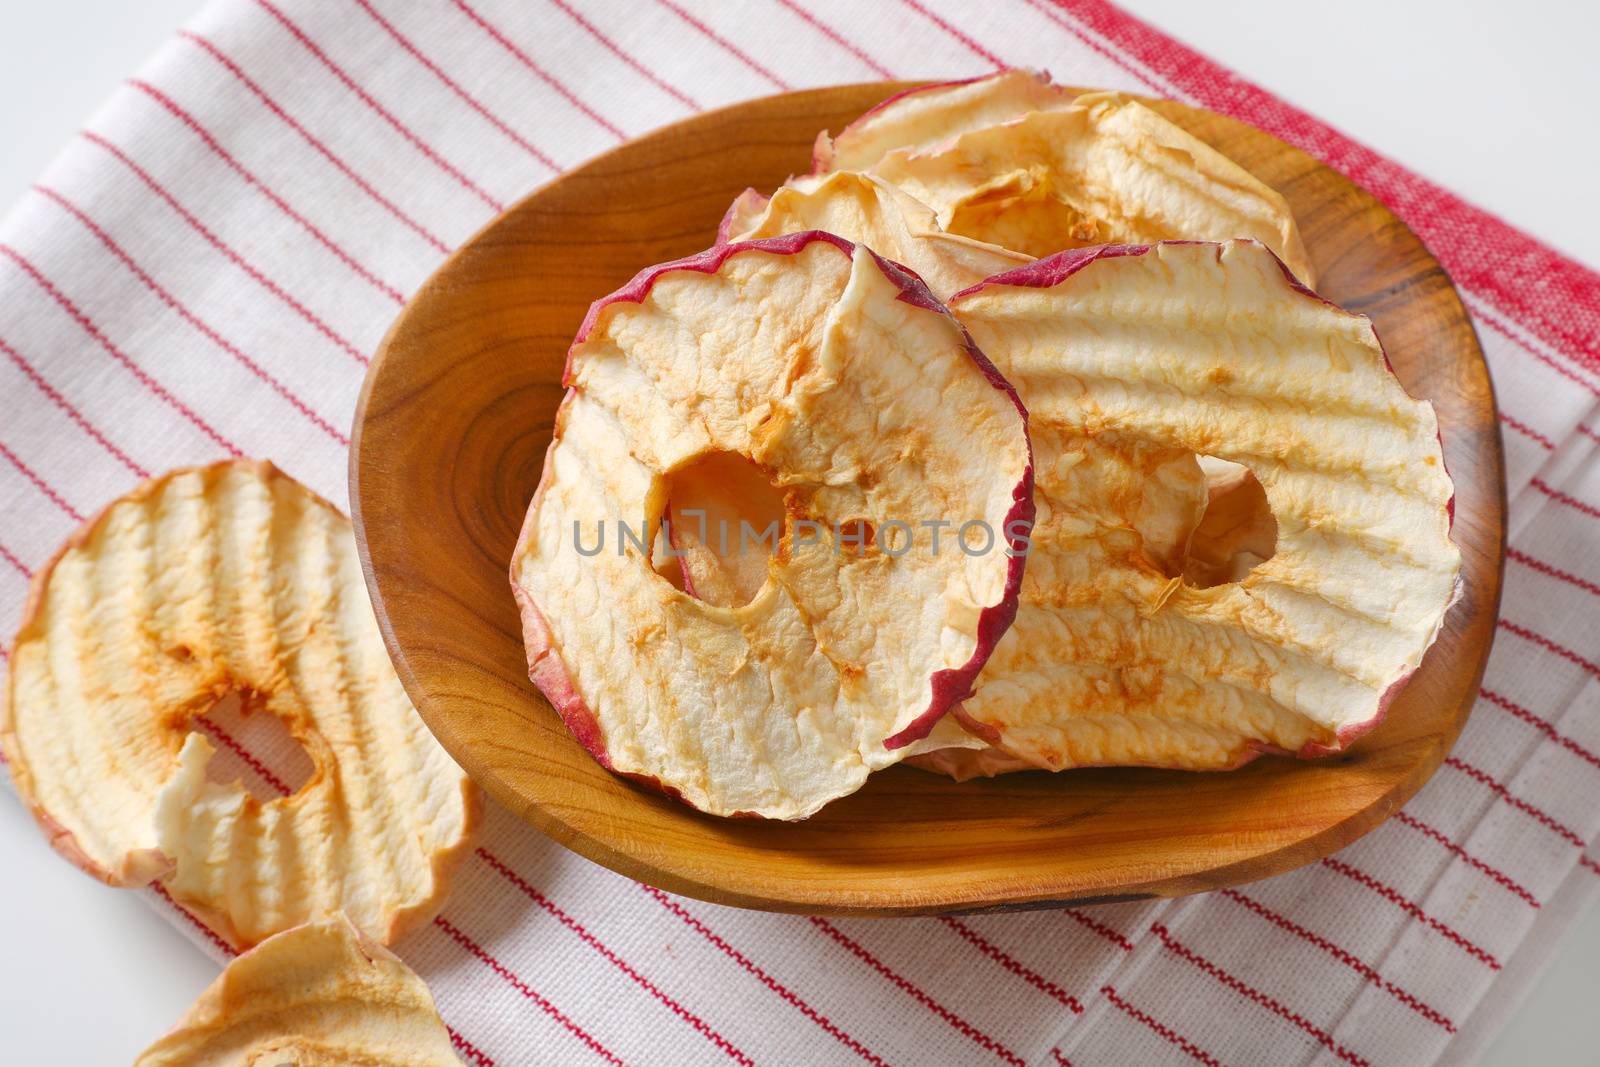 Bowl of dried apple slices - apple chips or rings - on striped tea towel